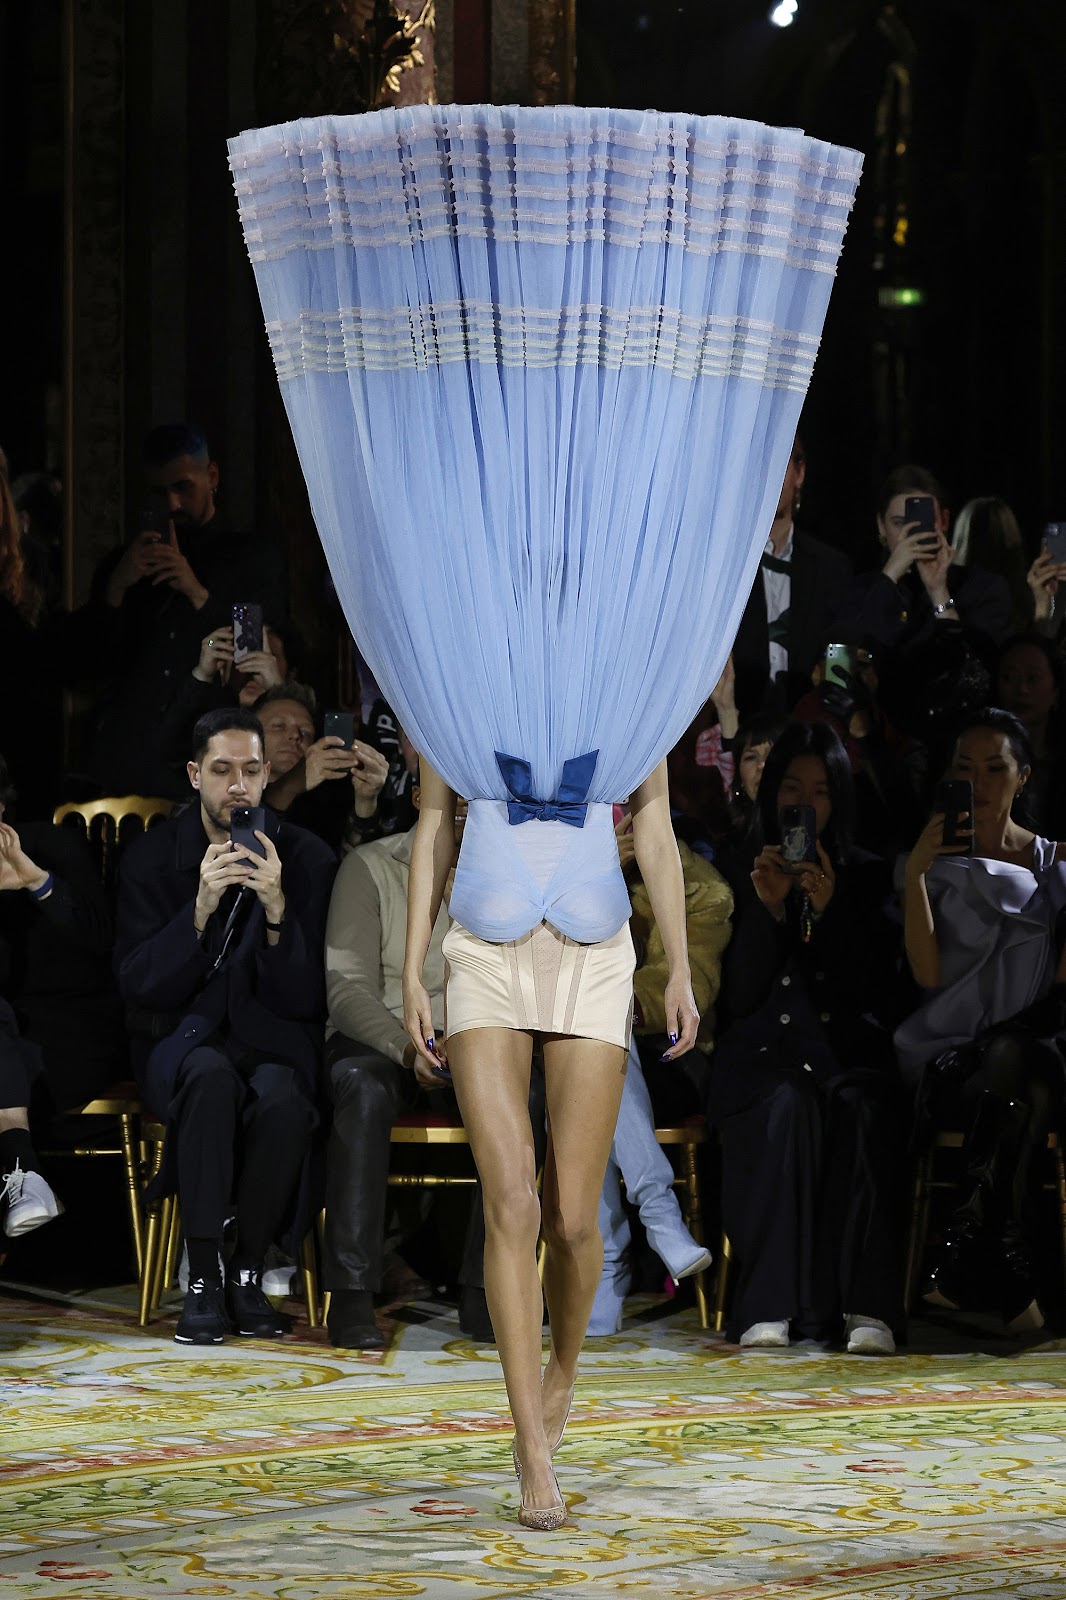 Paris fashion week upended with wacky, topsy-turvy gowns: 'This is crazy!'